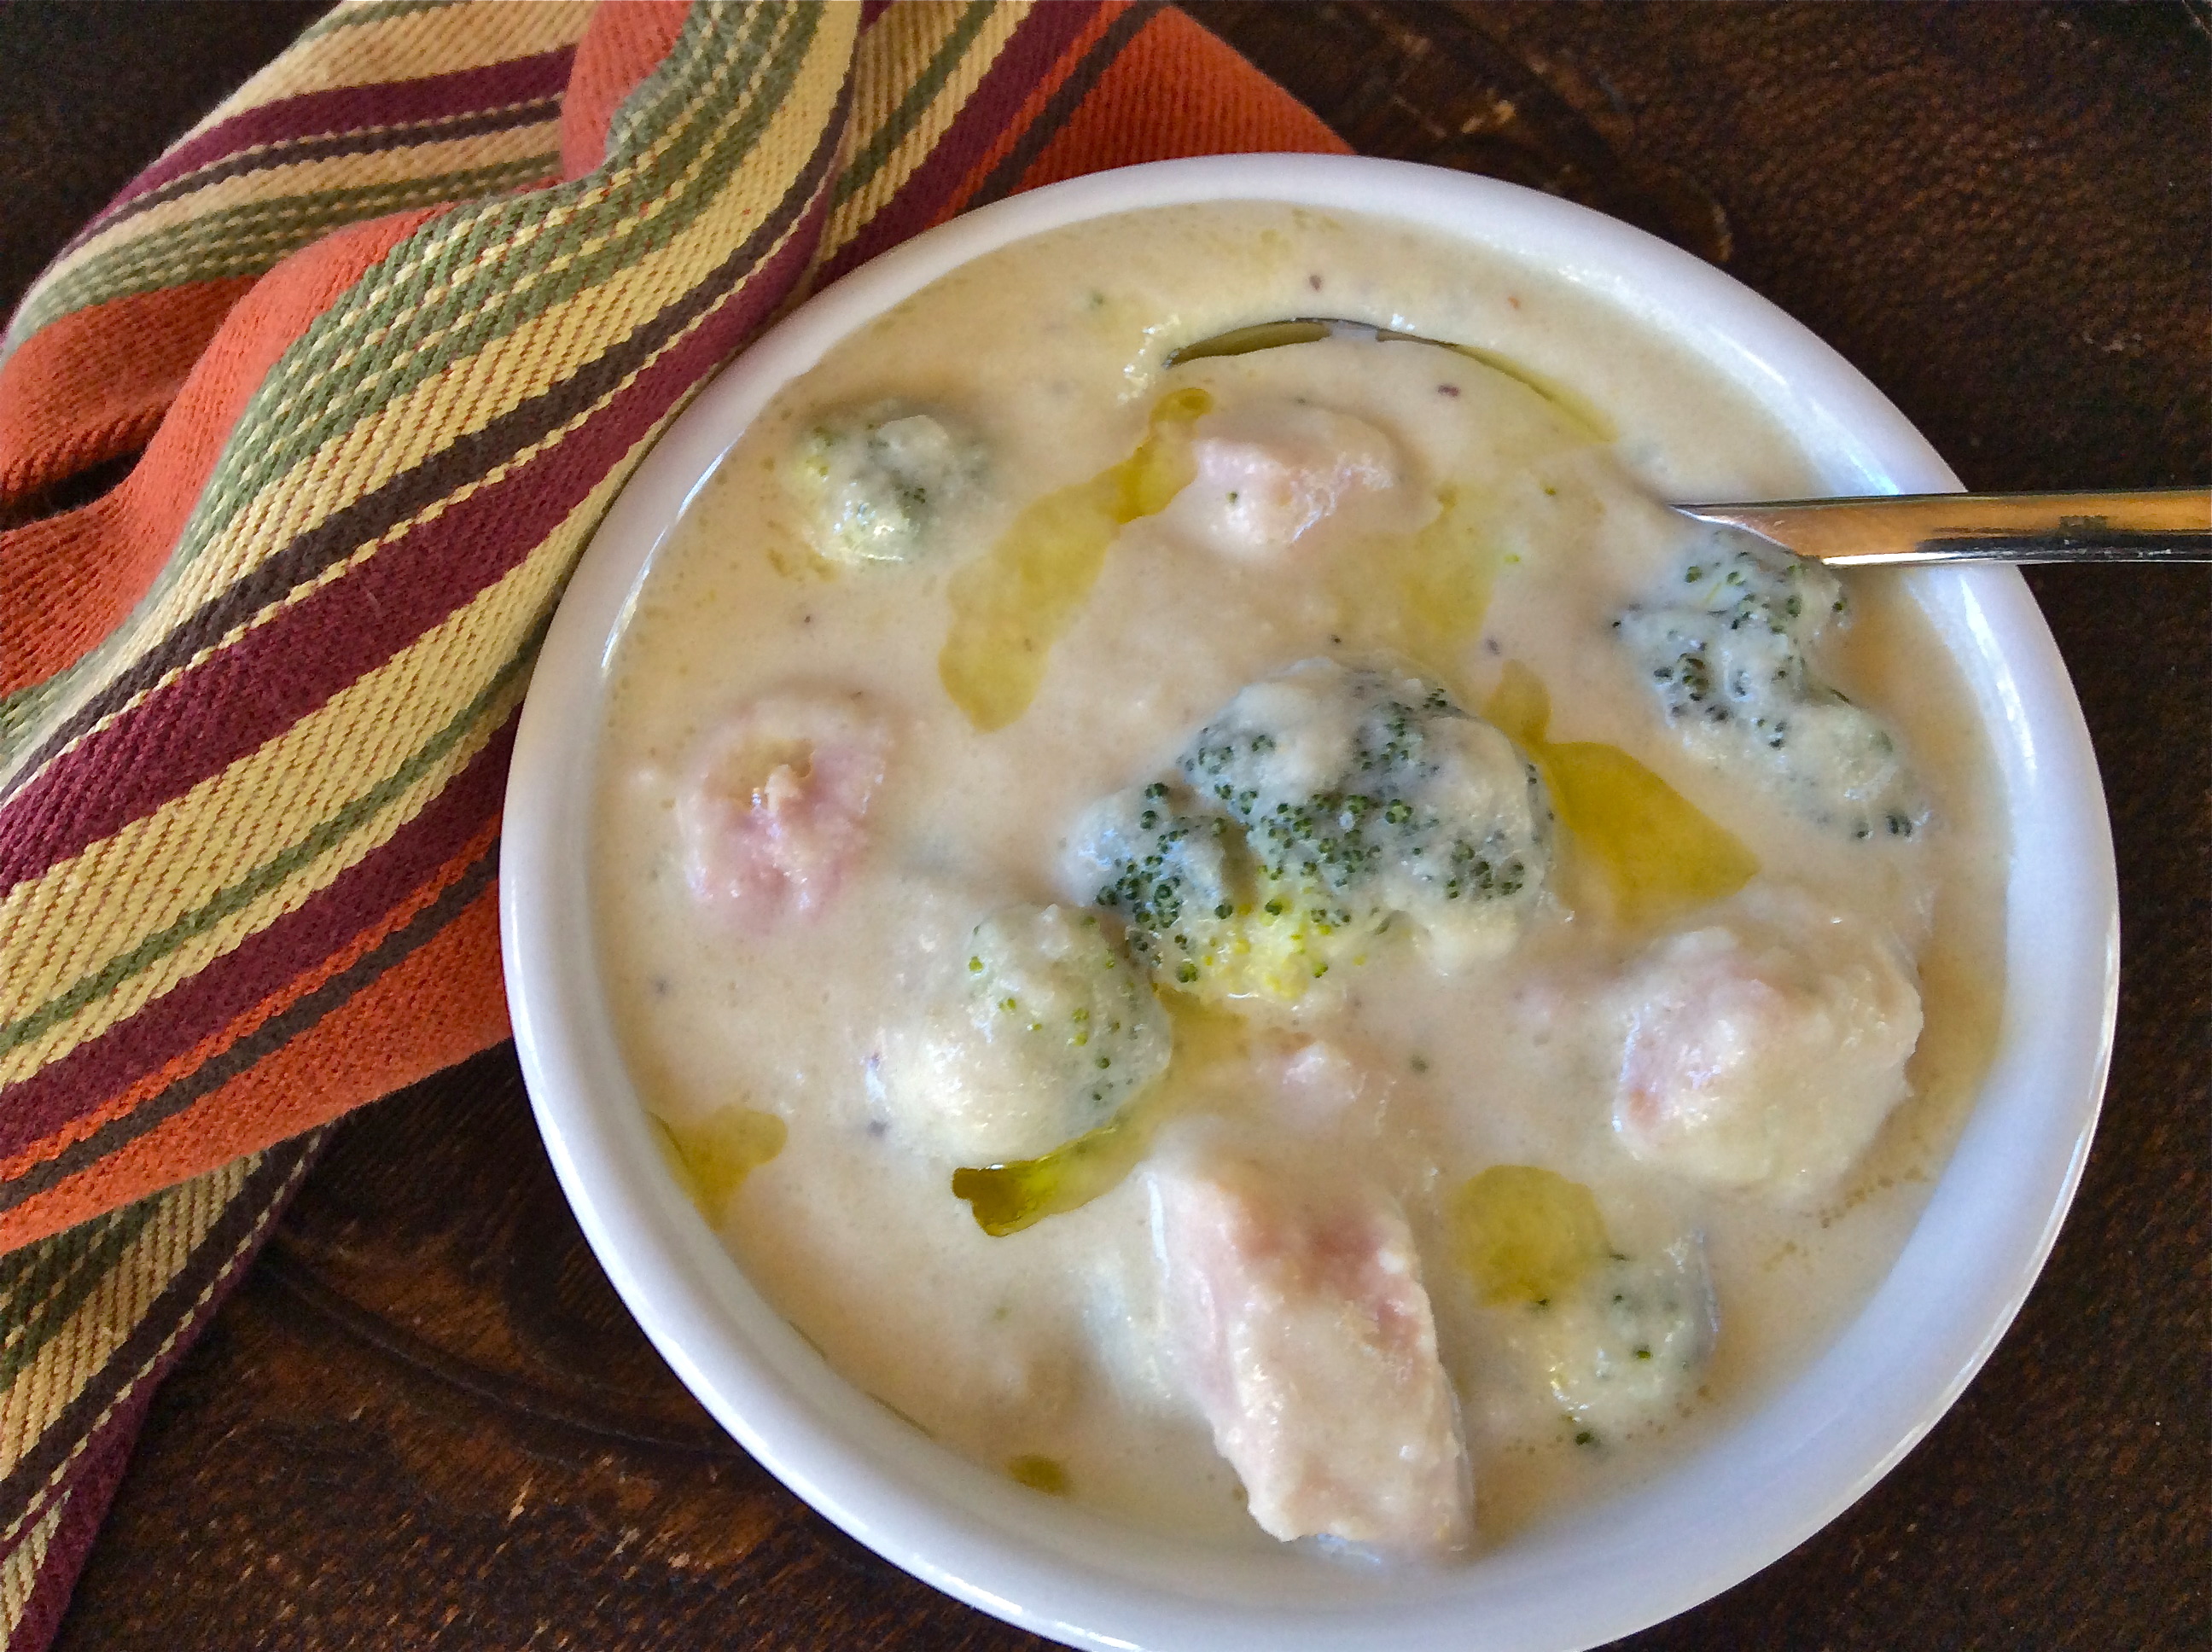 Creamy Cauliflower and Smoked Pork Chop Soup with Garlic-Infused Olive Oil